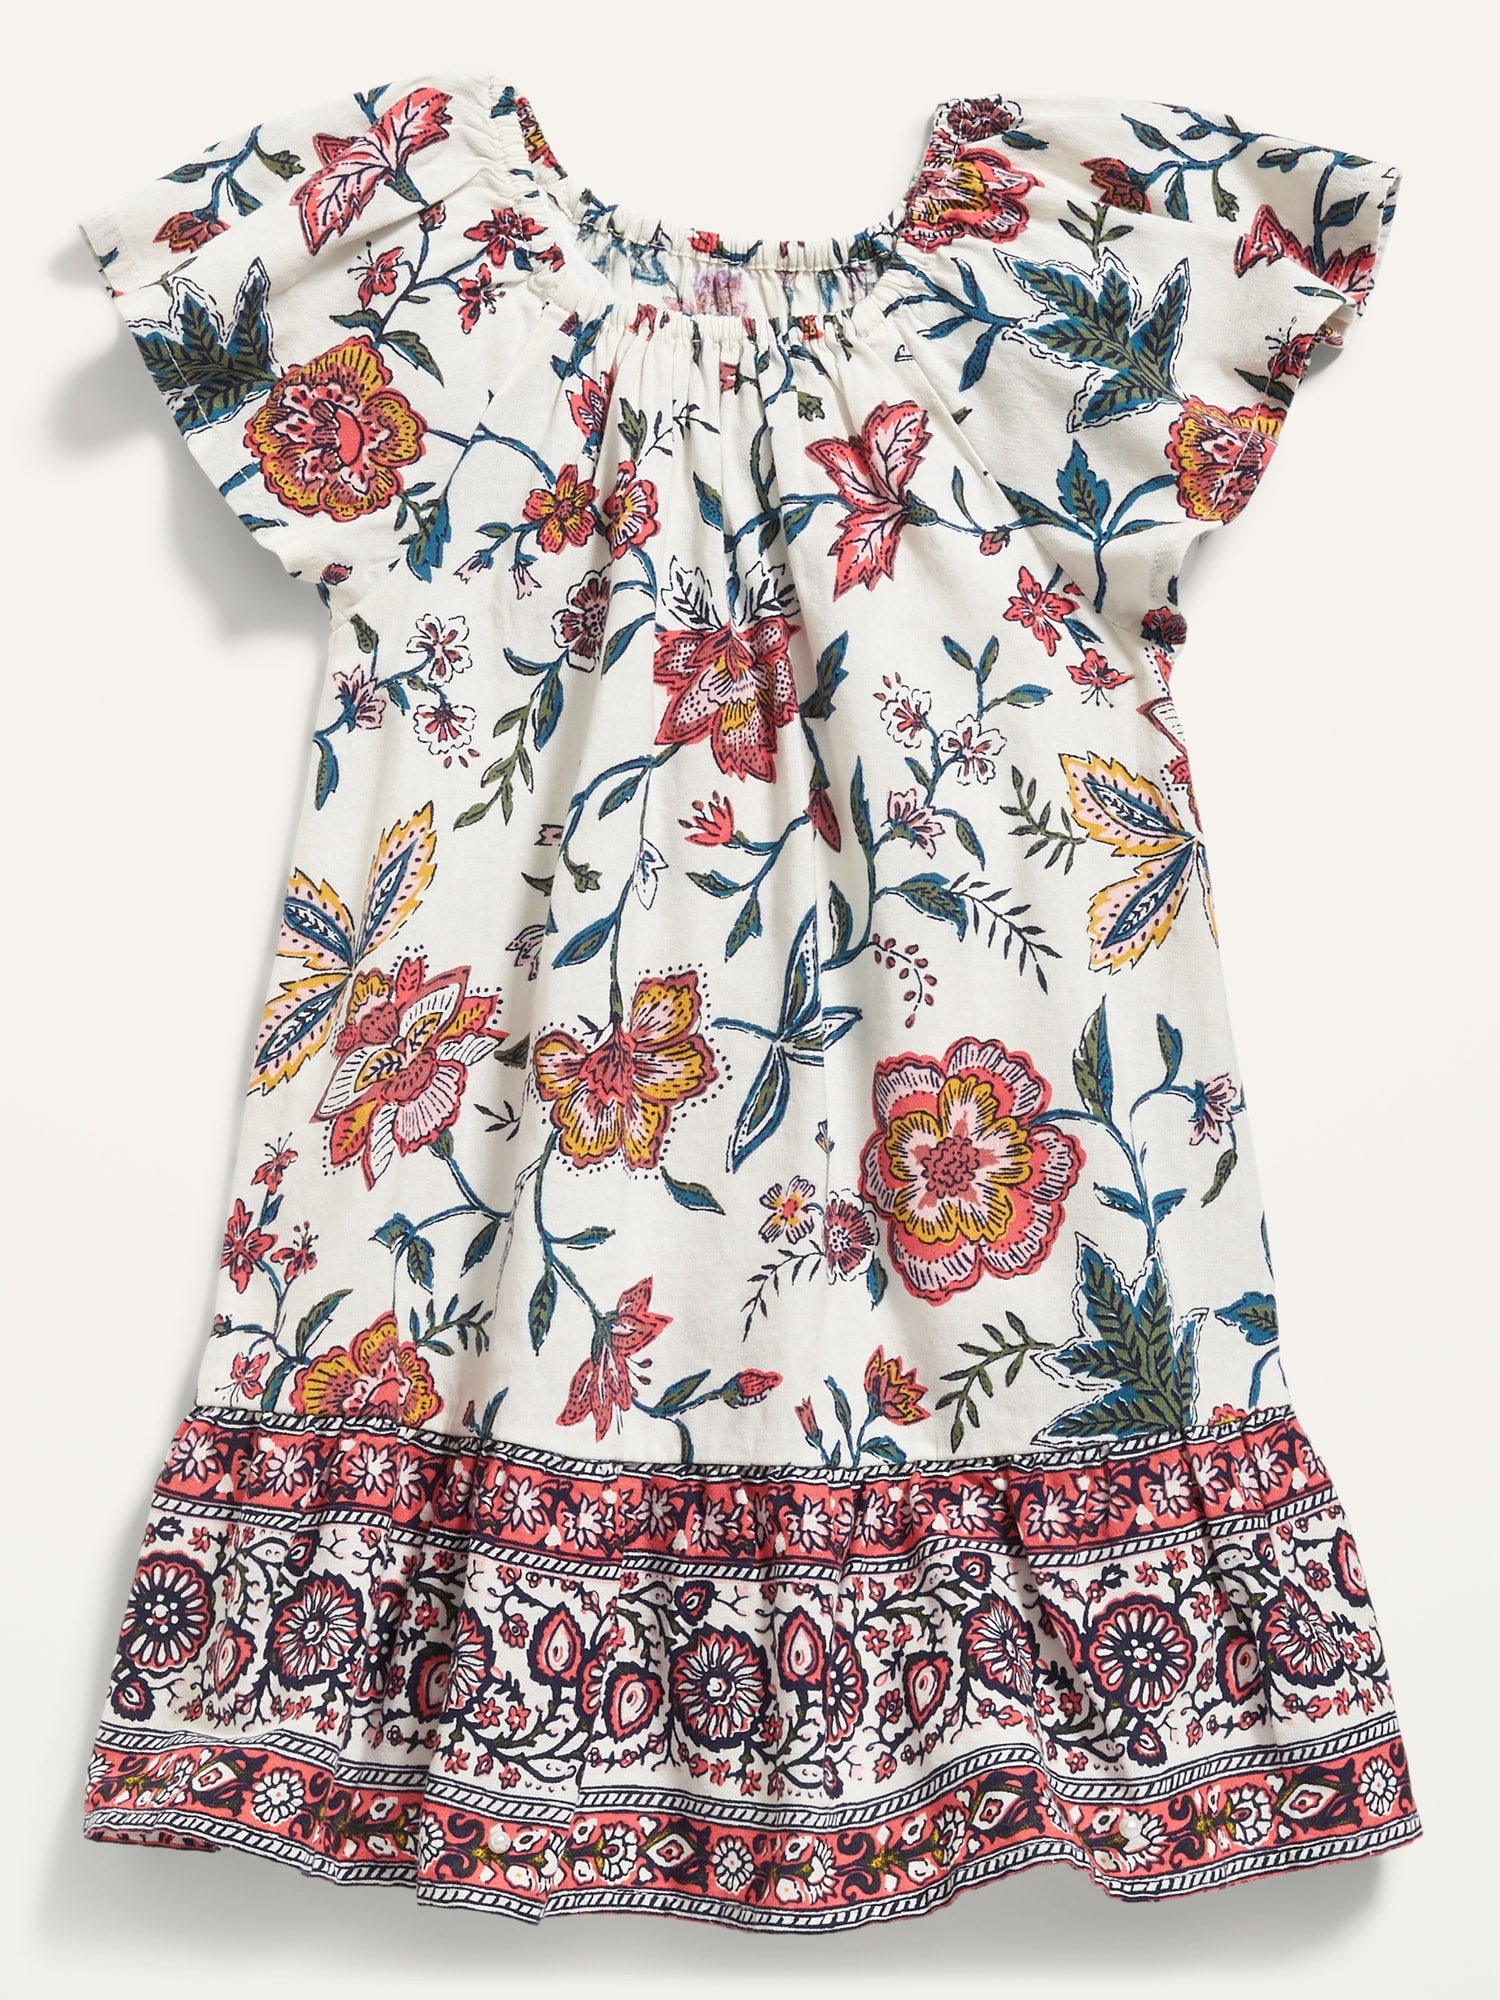 Floral Tiered Swing Dress for Toddler Girls | Old Navy